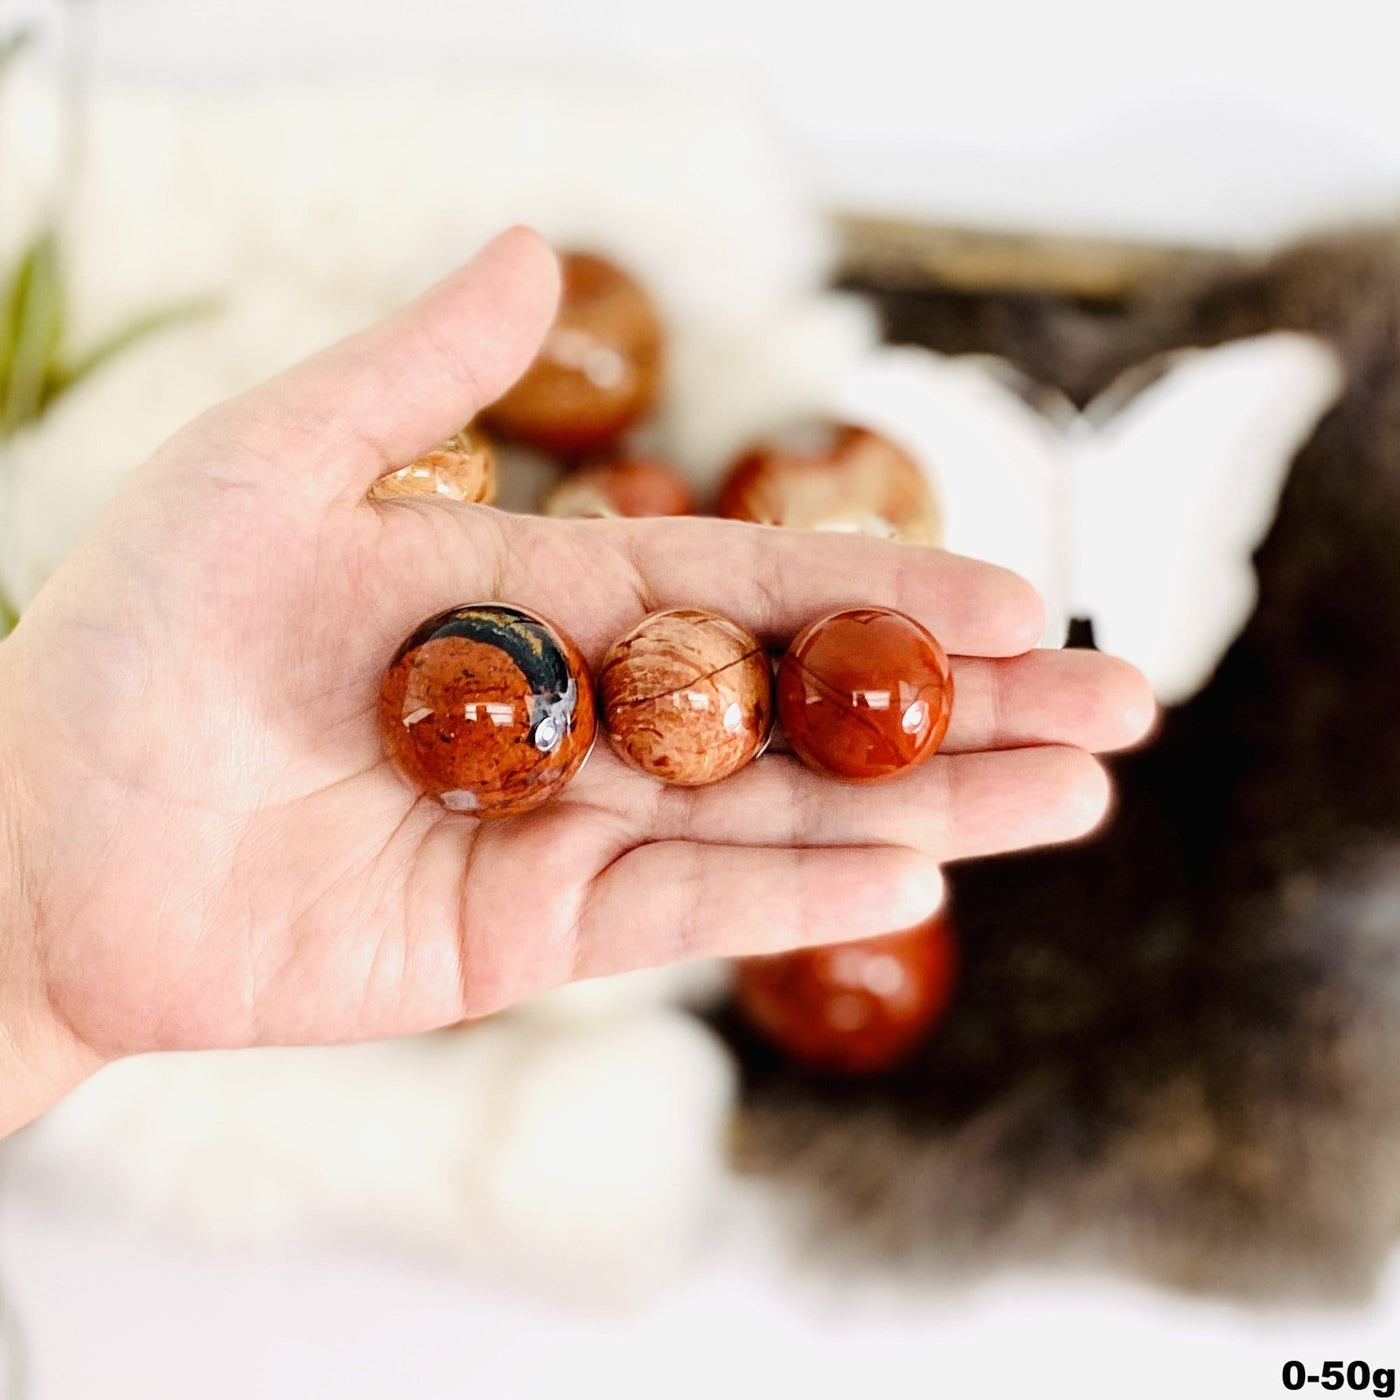 Hand holding up 0-50g Red Jasper Polished Spheres with decorations blurred in the background